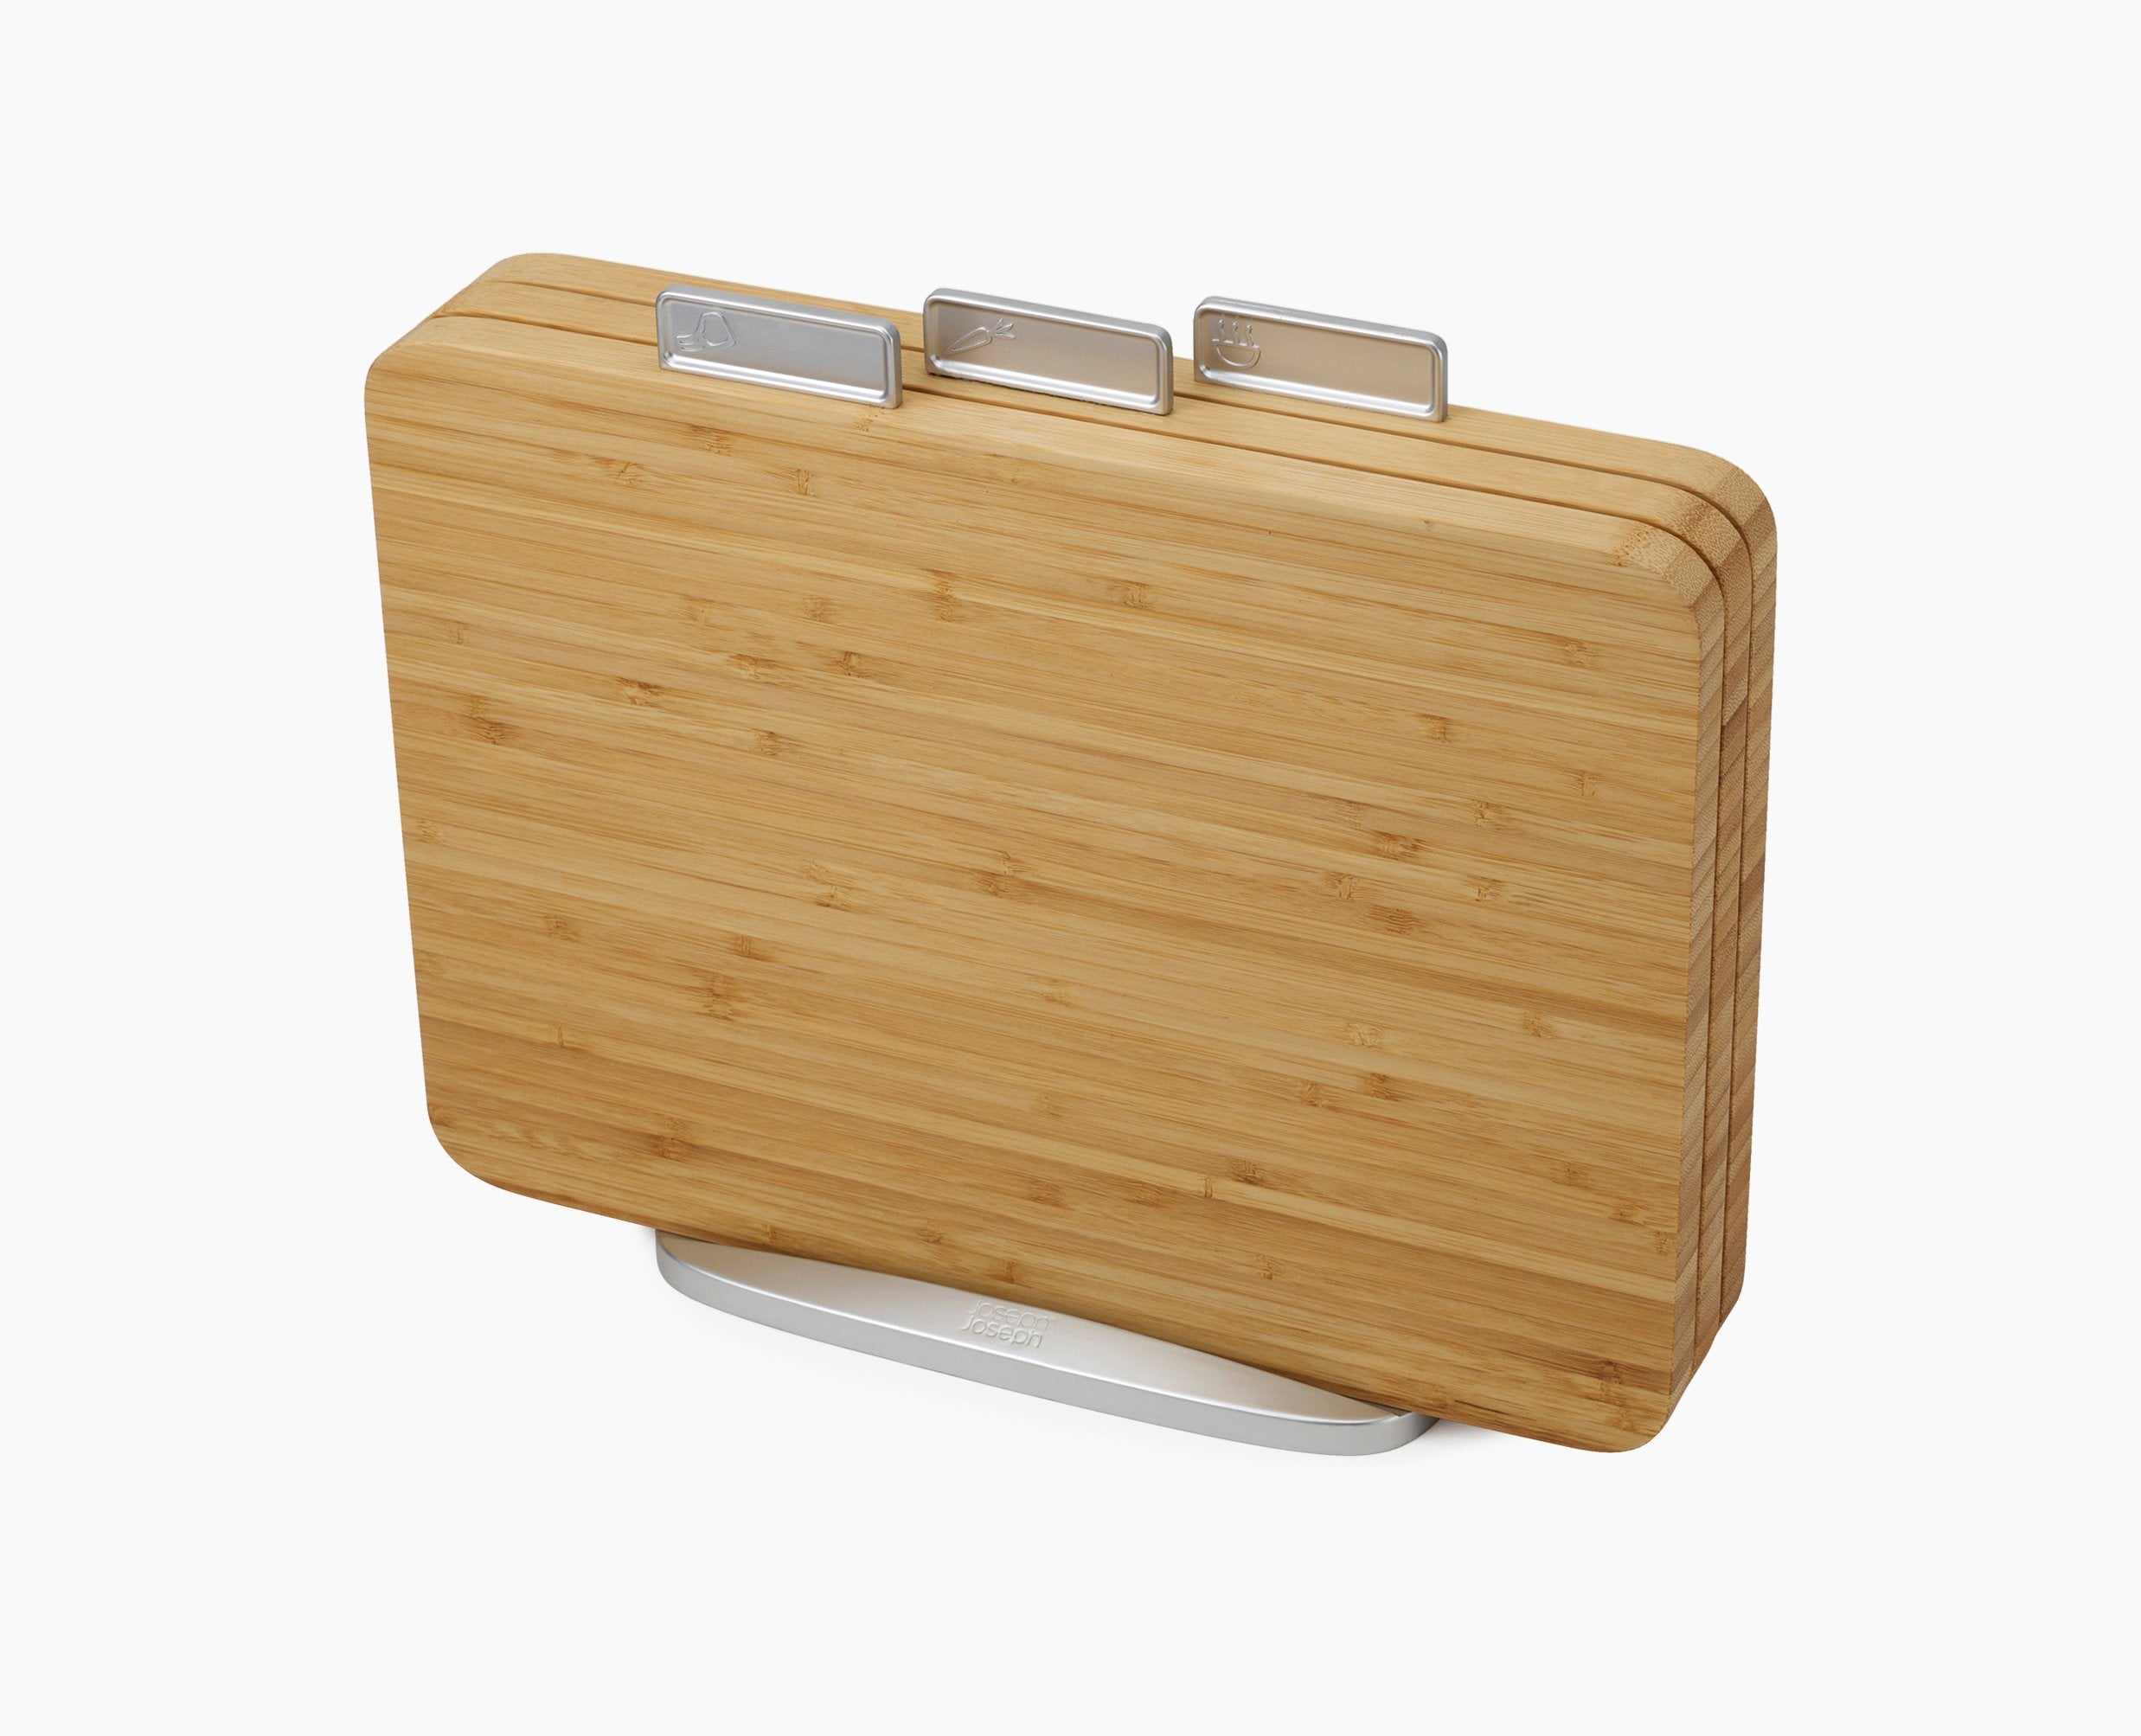 BEON.COM.AU  This chopping board set contains three food-specific bamboo chopping boards with a sturdy metal storage stand to hold them in.  Set of 3 food-specific chopping boards plus storage stand Designed to prevent cross-contamination of different food types Illustrated, index-style tabs on boards indica... Joseph Joseph at BEON.COM.AU